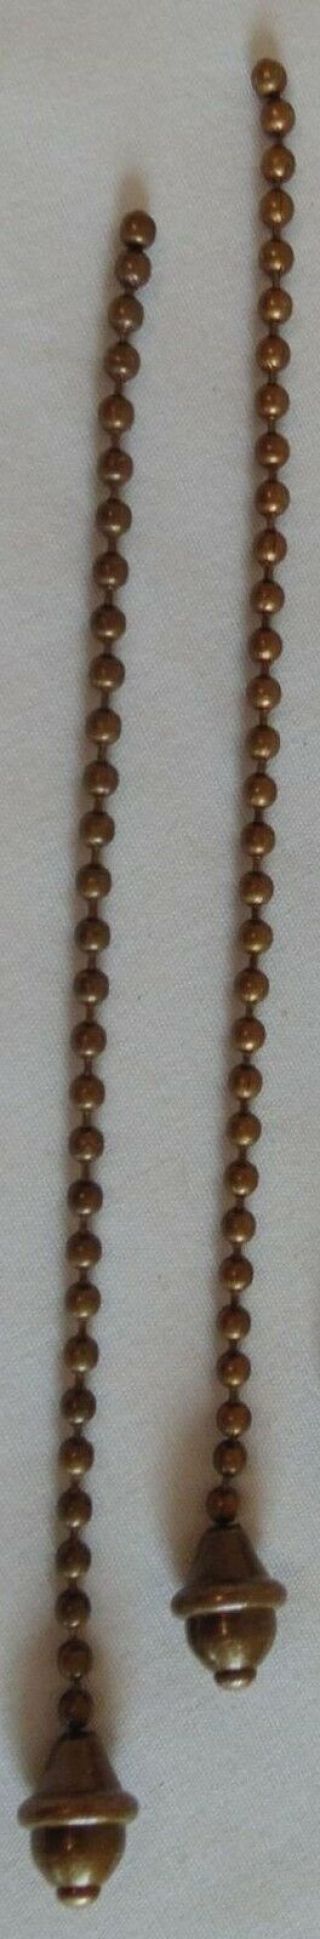 2 BRONZE BRASS HUBBELL TYPE ACORN PULL CHAINS for HANDEL TIFFANY B&H LAMPS 2